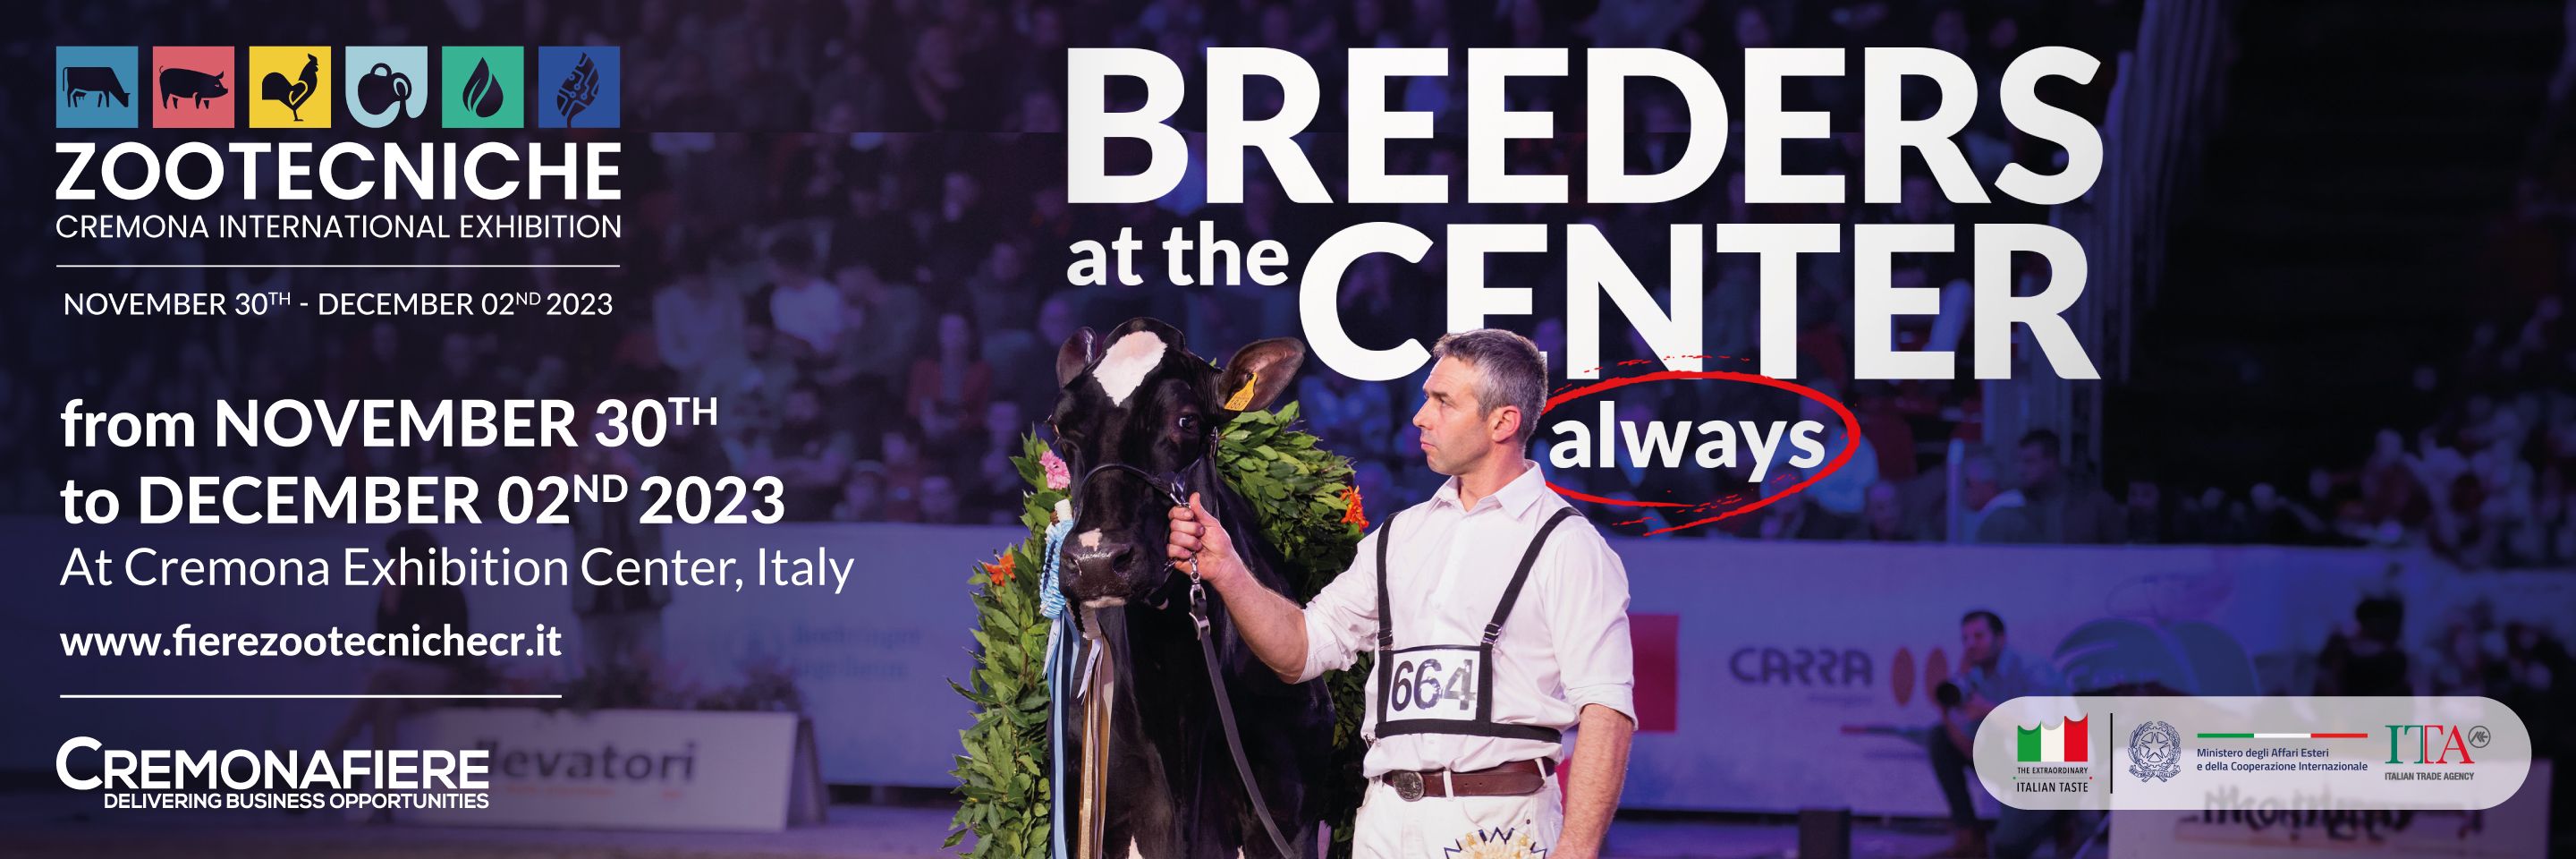 Jersey generation counts and breed purity - Alta Genetics